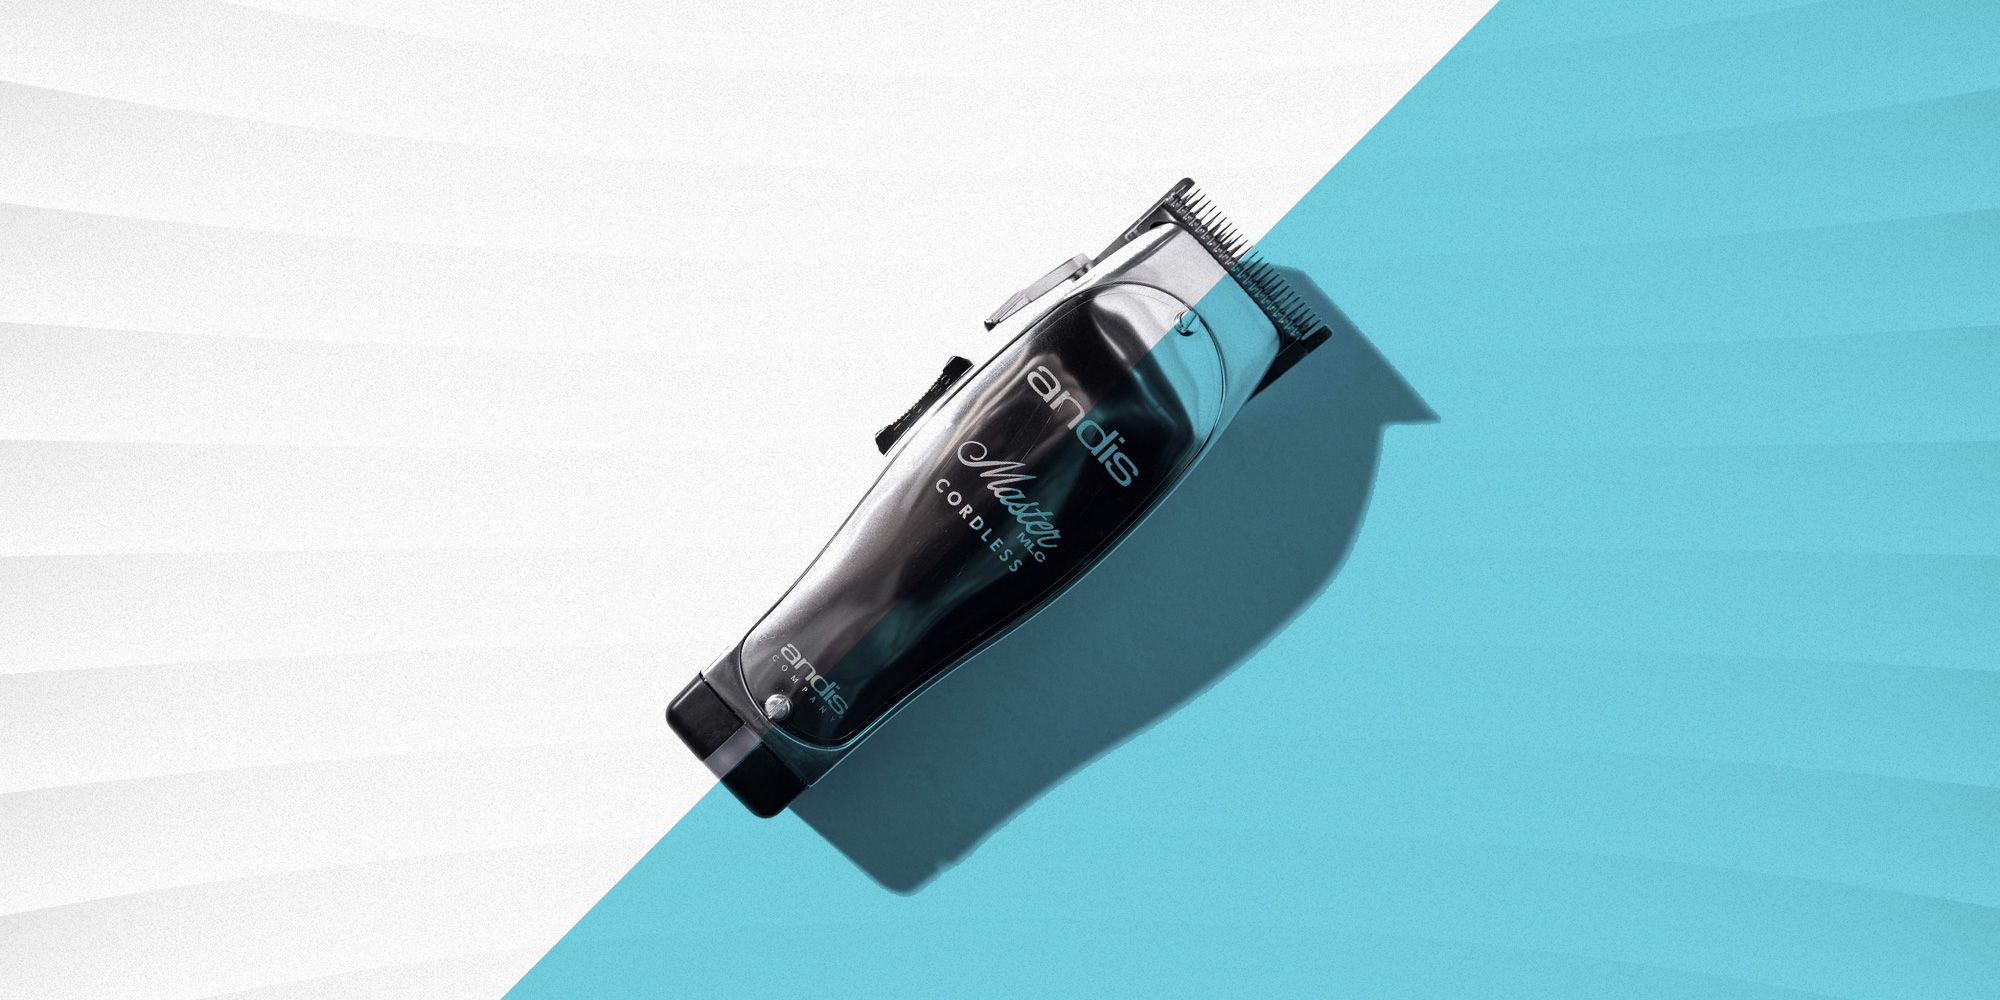 6 best hair clippers to consider this year according to experts